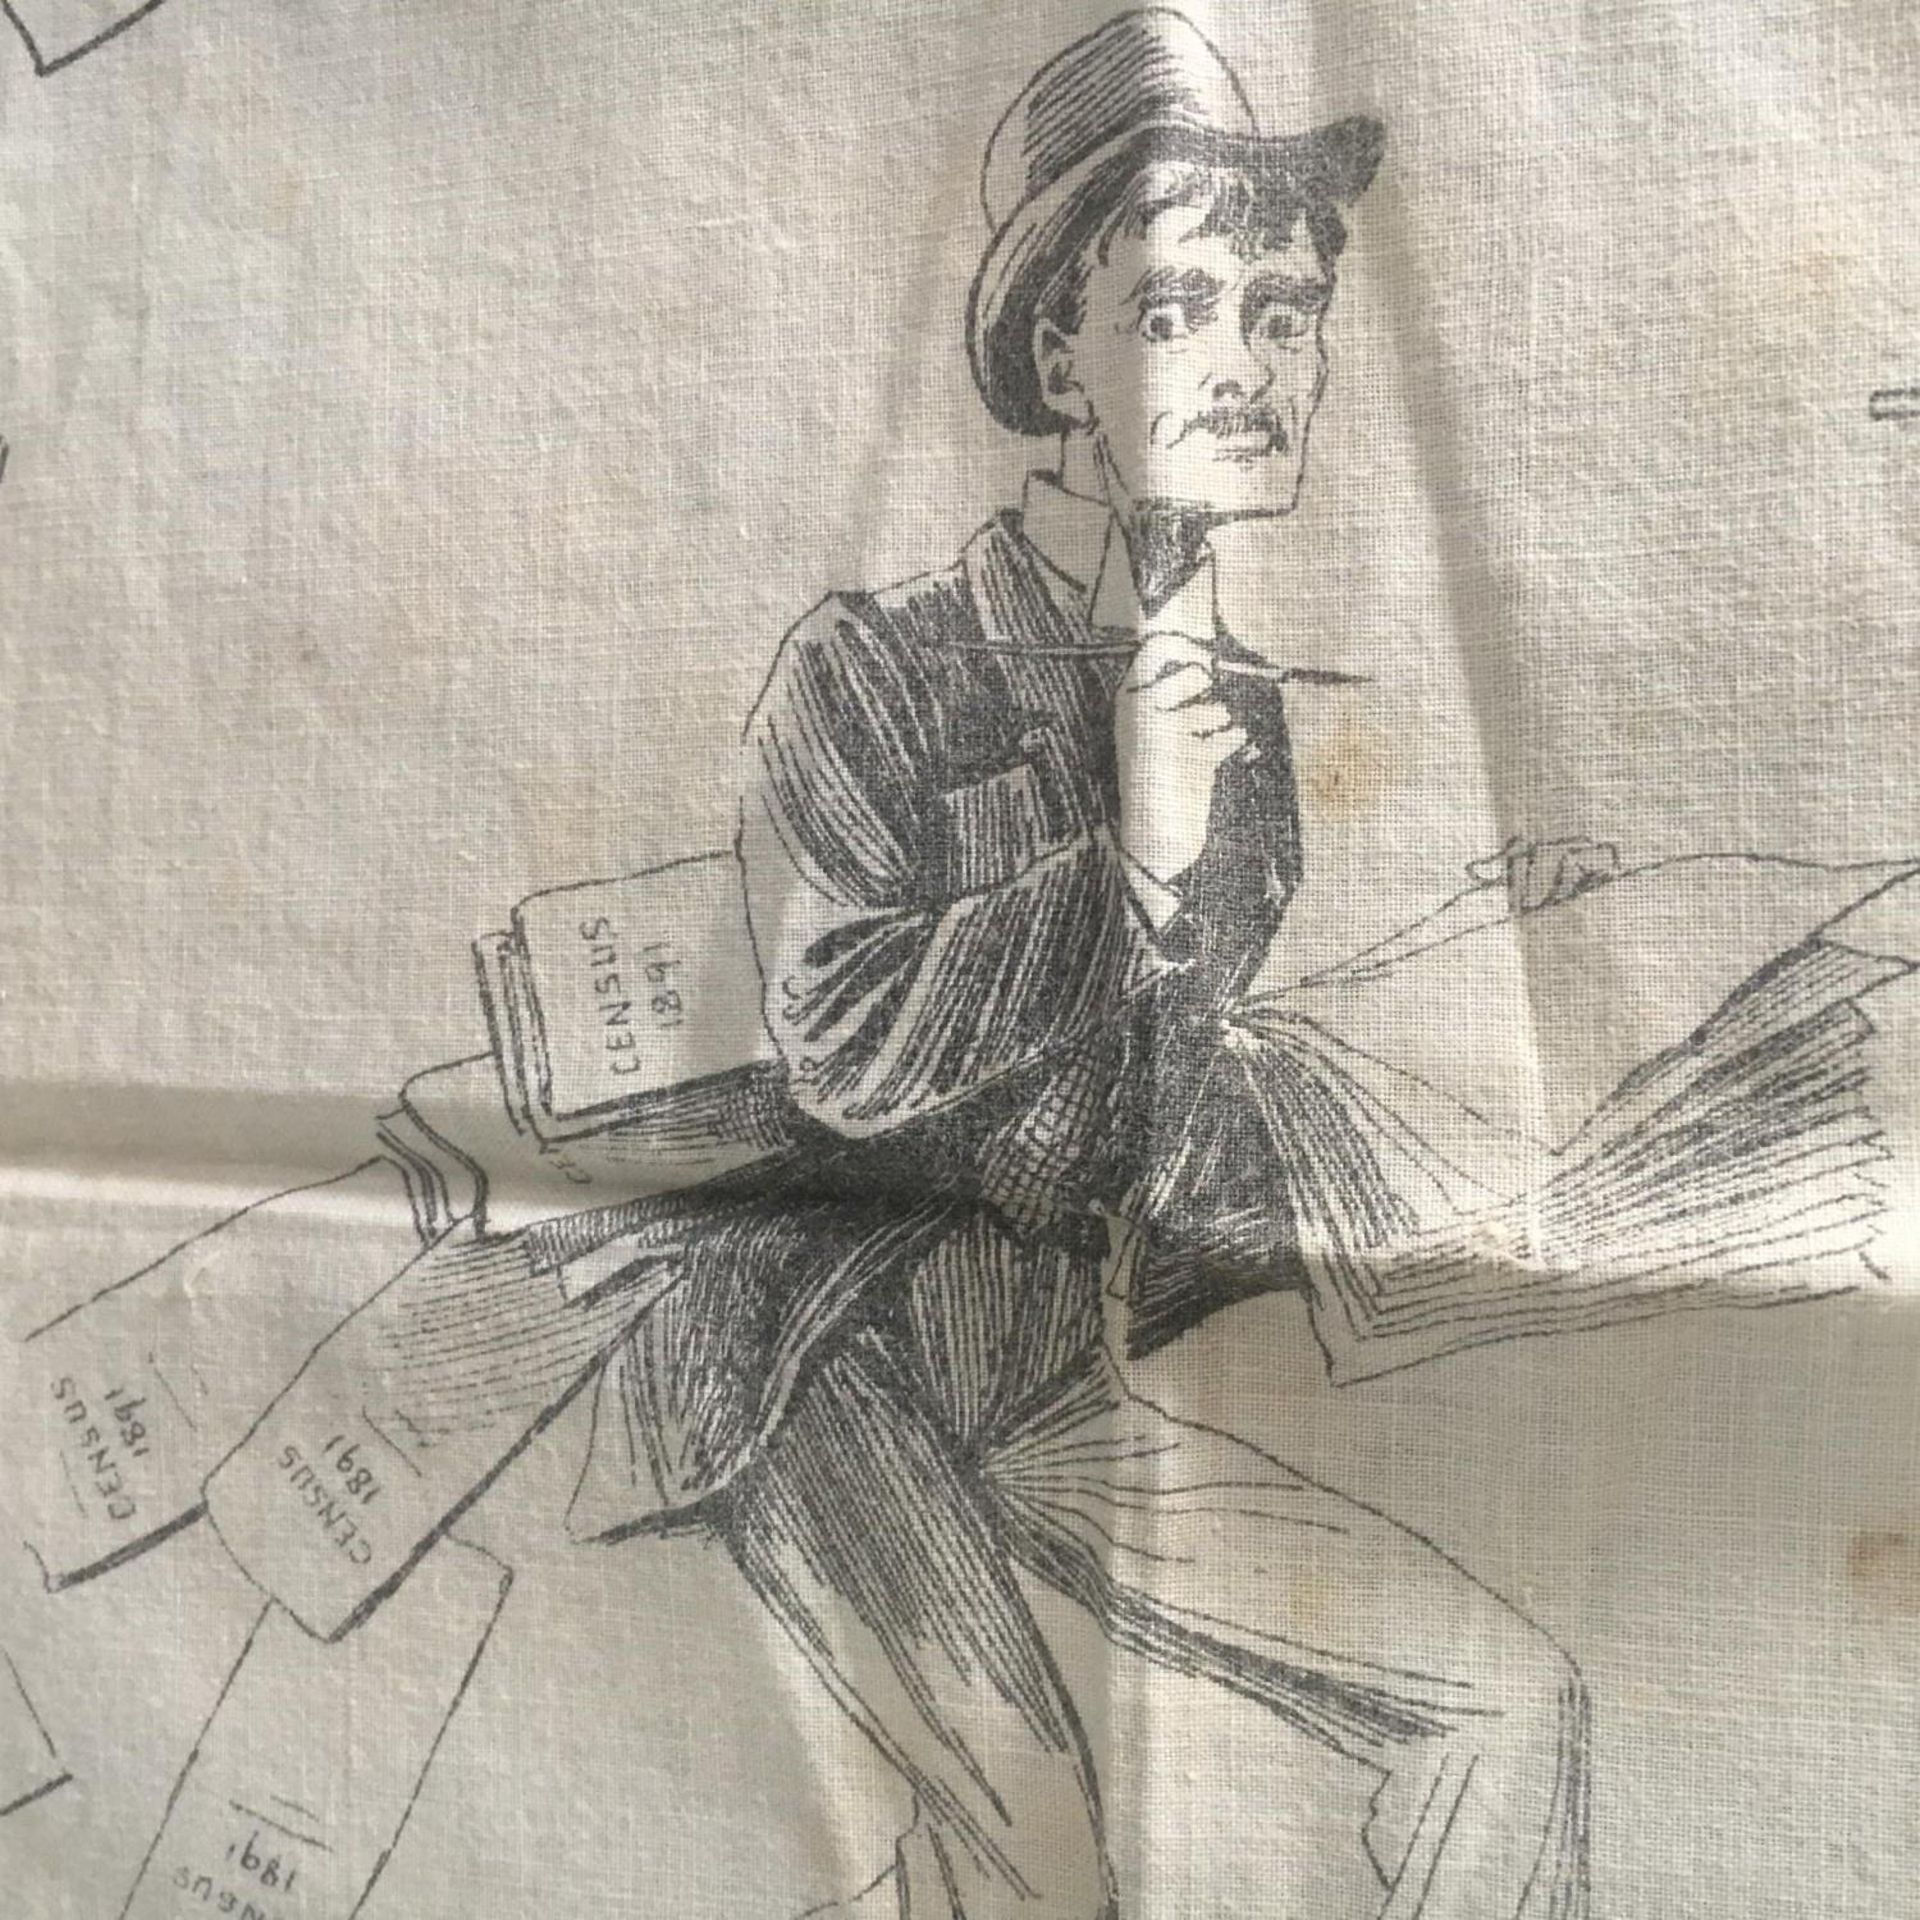 1891 "The Census Taker and Some Things He Wants to Know" printed Large Handkerchief. On cotton and - Image 7 of 7